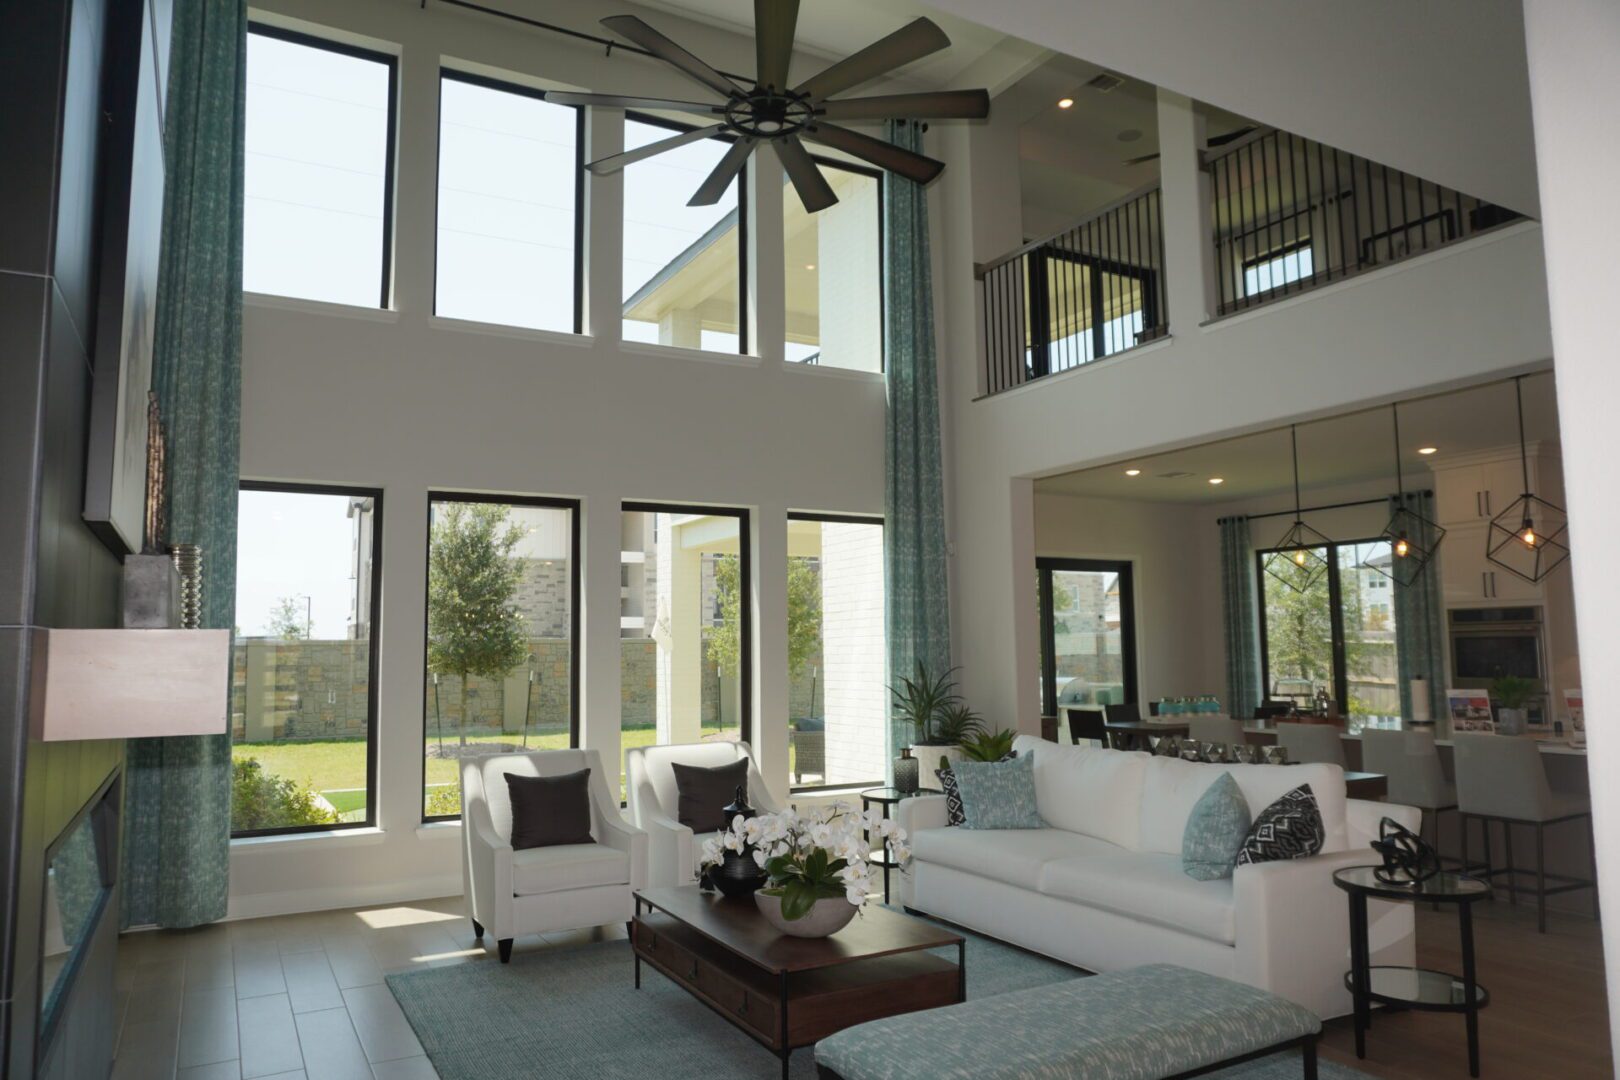 A spacious living room with large windows and a ceiling fan, perfect for enjoying the Texas breeze.